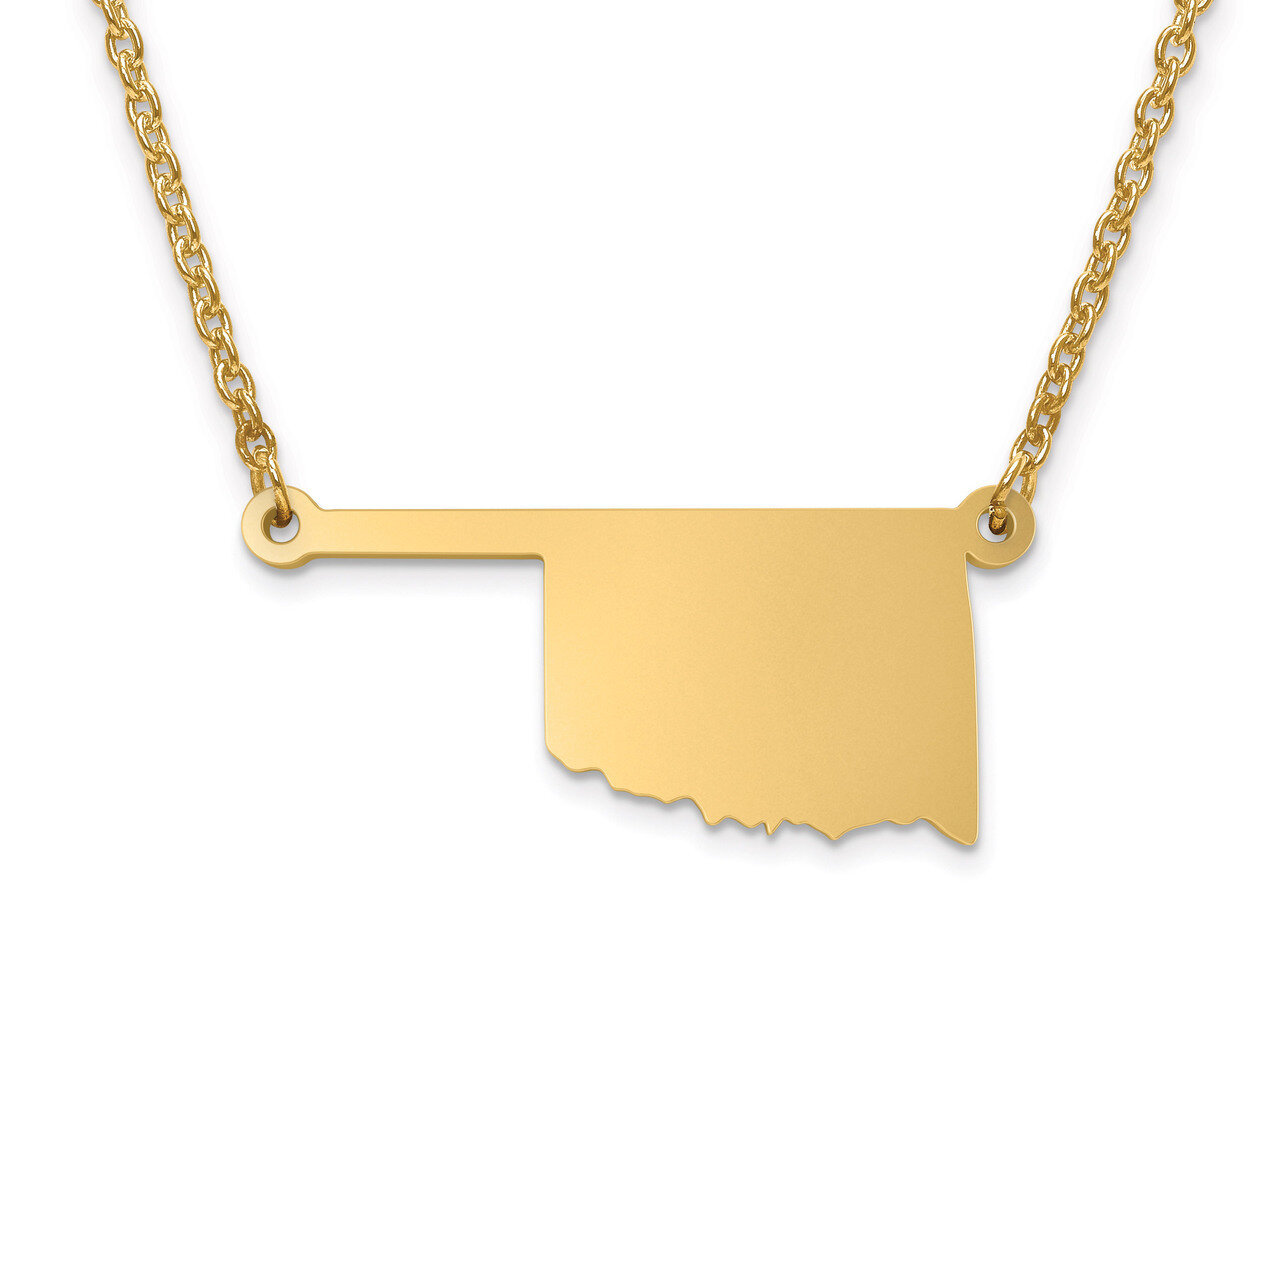 Oklahoma State Pendant with Chain Engravable Gold-plated on Sterling Silver